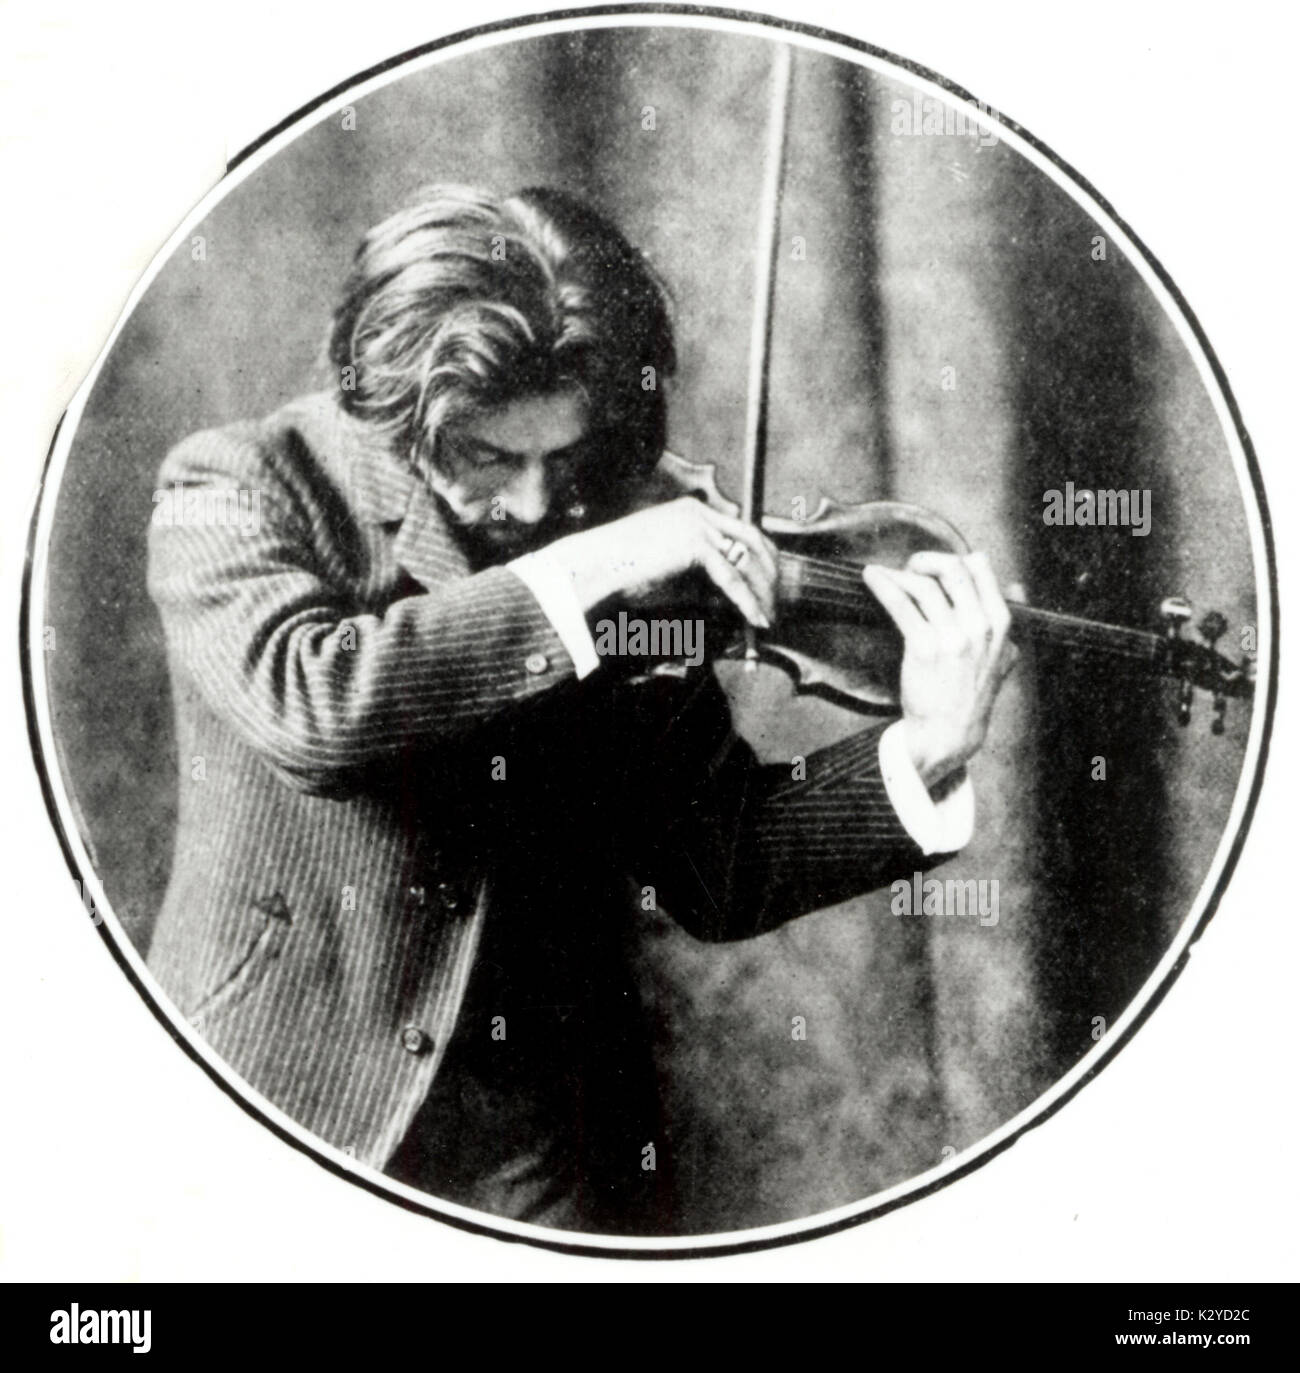 THIBAUD, Jacques - tuning his violin Thibaud's violin was one of the most famous Stradivari. French violinist (1880-1953). Stock Photo